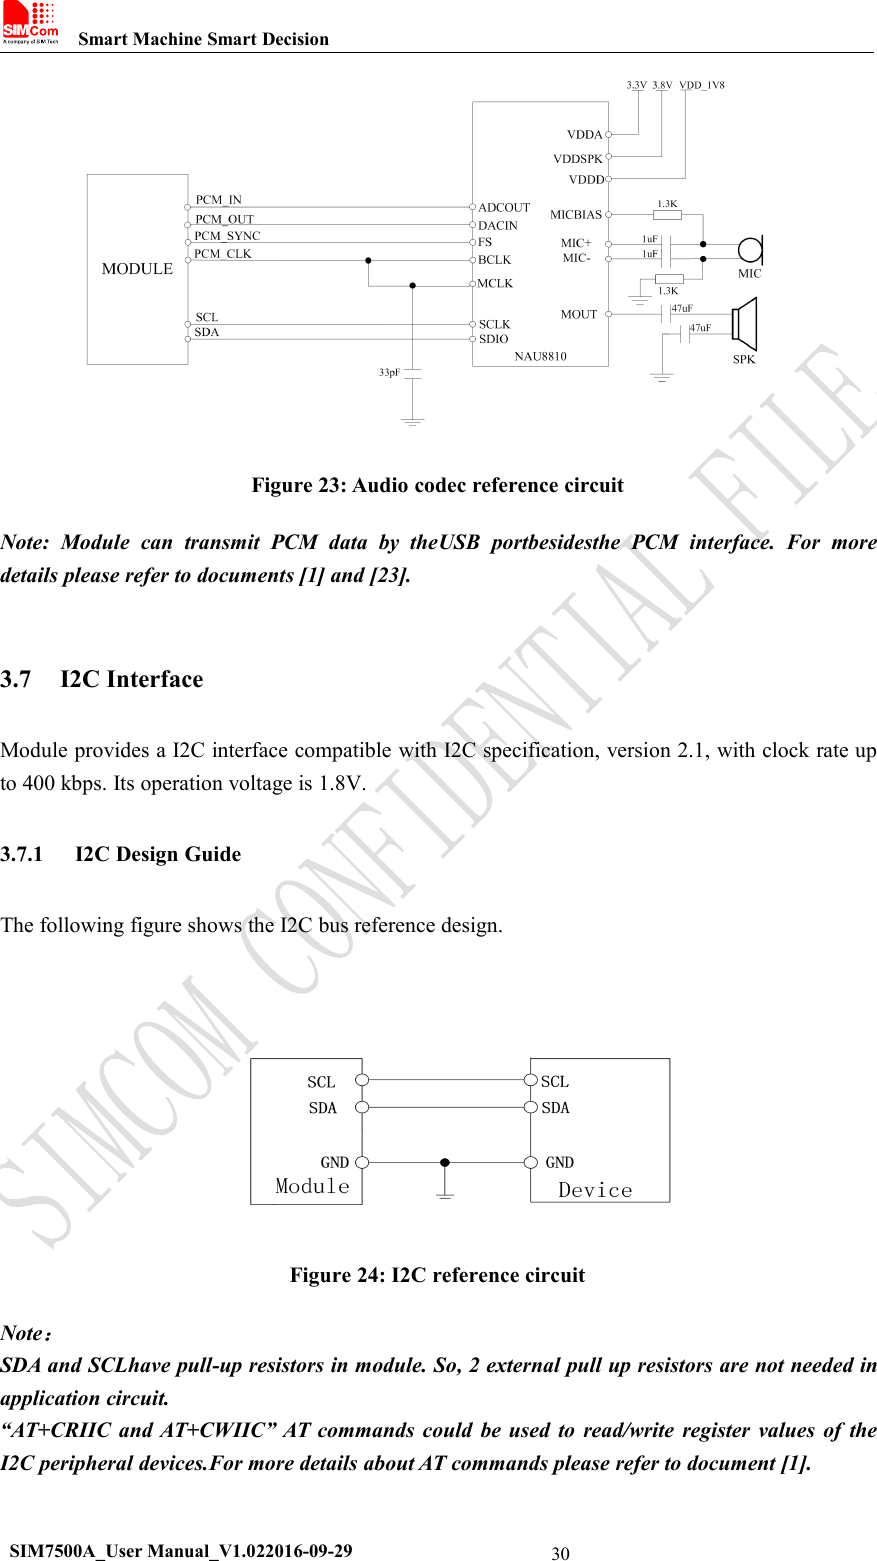 Smart Machine Smart DecisionSIM7500A_User Manual_V1.022016-09-2930Figure 23: Audio codec reference circuitNote: Module can transmit PCM data by theUSB portbesidesthe PCM interface. For moredetails please refer to documents [1] and [23].3.7 I2C InterfaceModule provides a I2C interface compatible with I2C specification, version 2.1, with clock rate upto 400 kbps. Its operation voltage is 1.8V.3.7.1 I2C Design GuideThe following figure shows the I2C bus reference design.Figure 24: I2C reference circuitNote：SDA and SCLhave pull-up resistors in module. So, 2 external pull up resistors are not needed inapplication circuit.“AT+CRIIC and AT+CWIIC” AT commands could be used to read/write register values of theI2C peripheral devices.For more details about AT commands please refer to document [1].